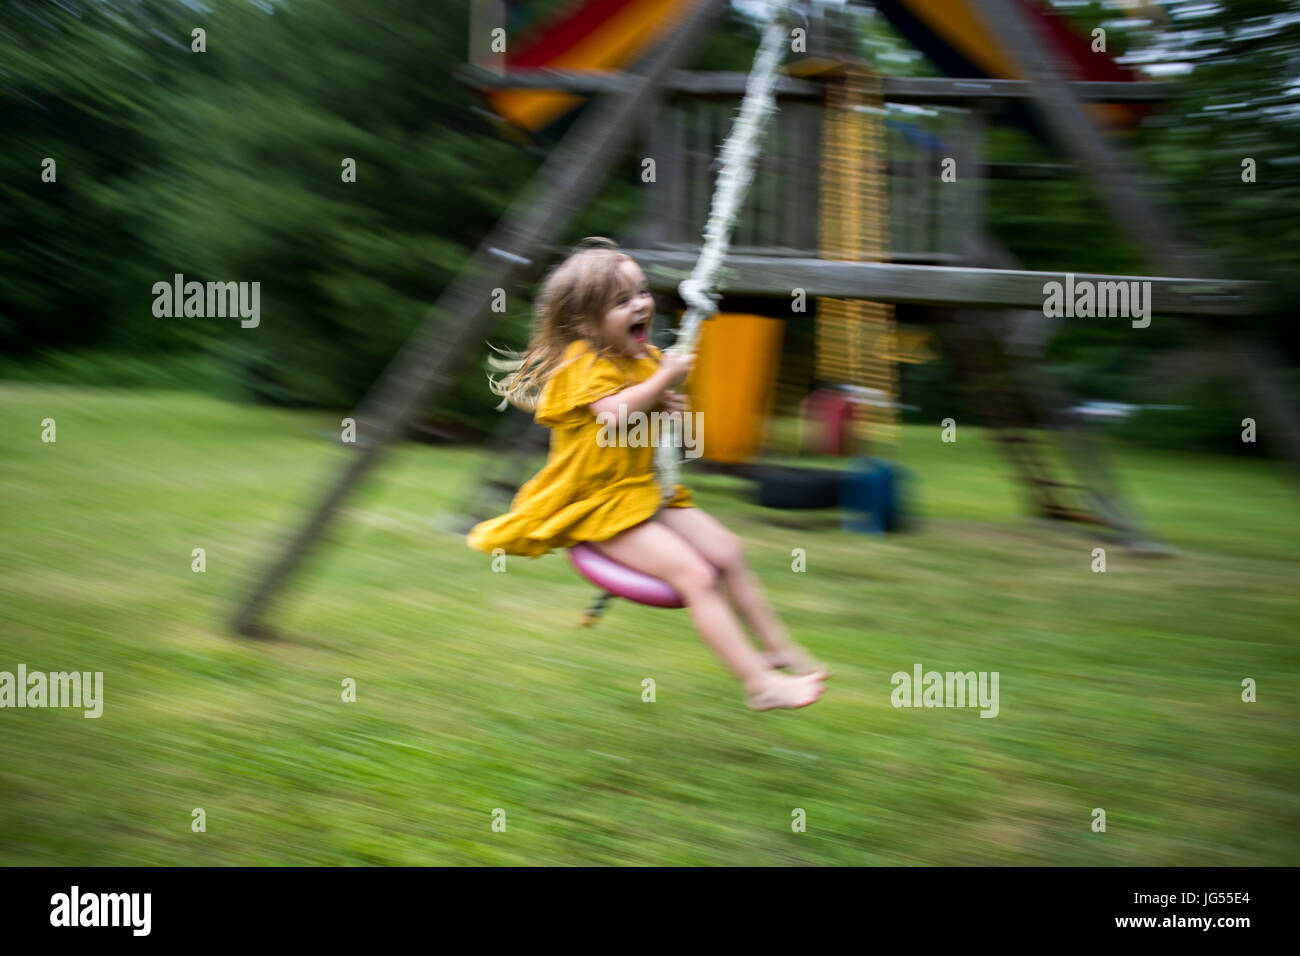 Little girl in yellow dress jumping on the trampoline Stock Photo